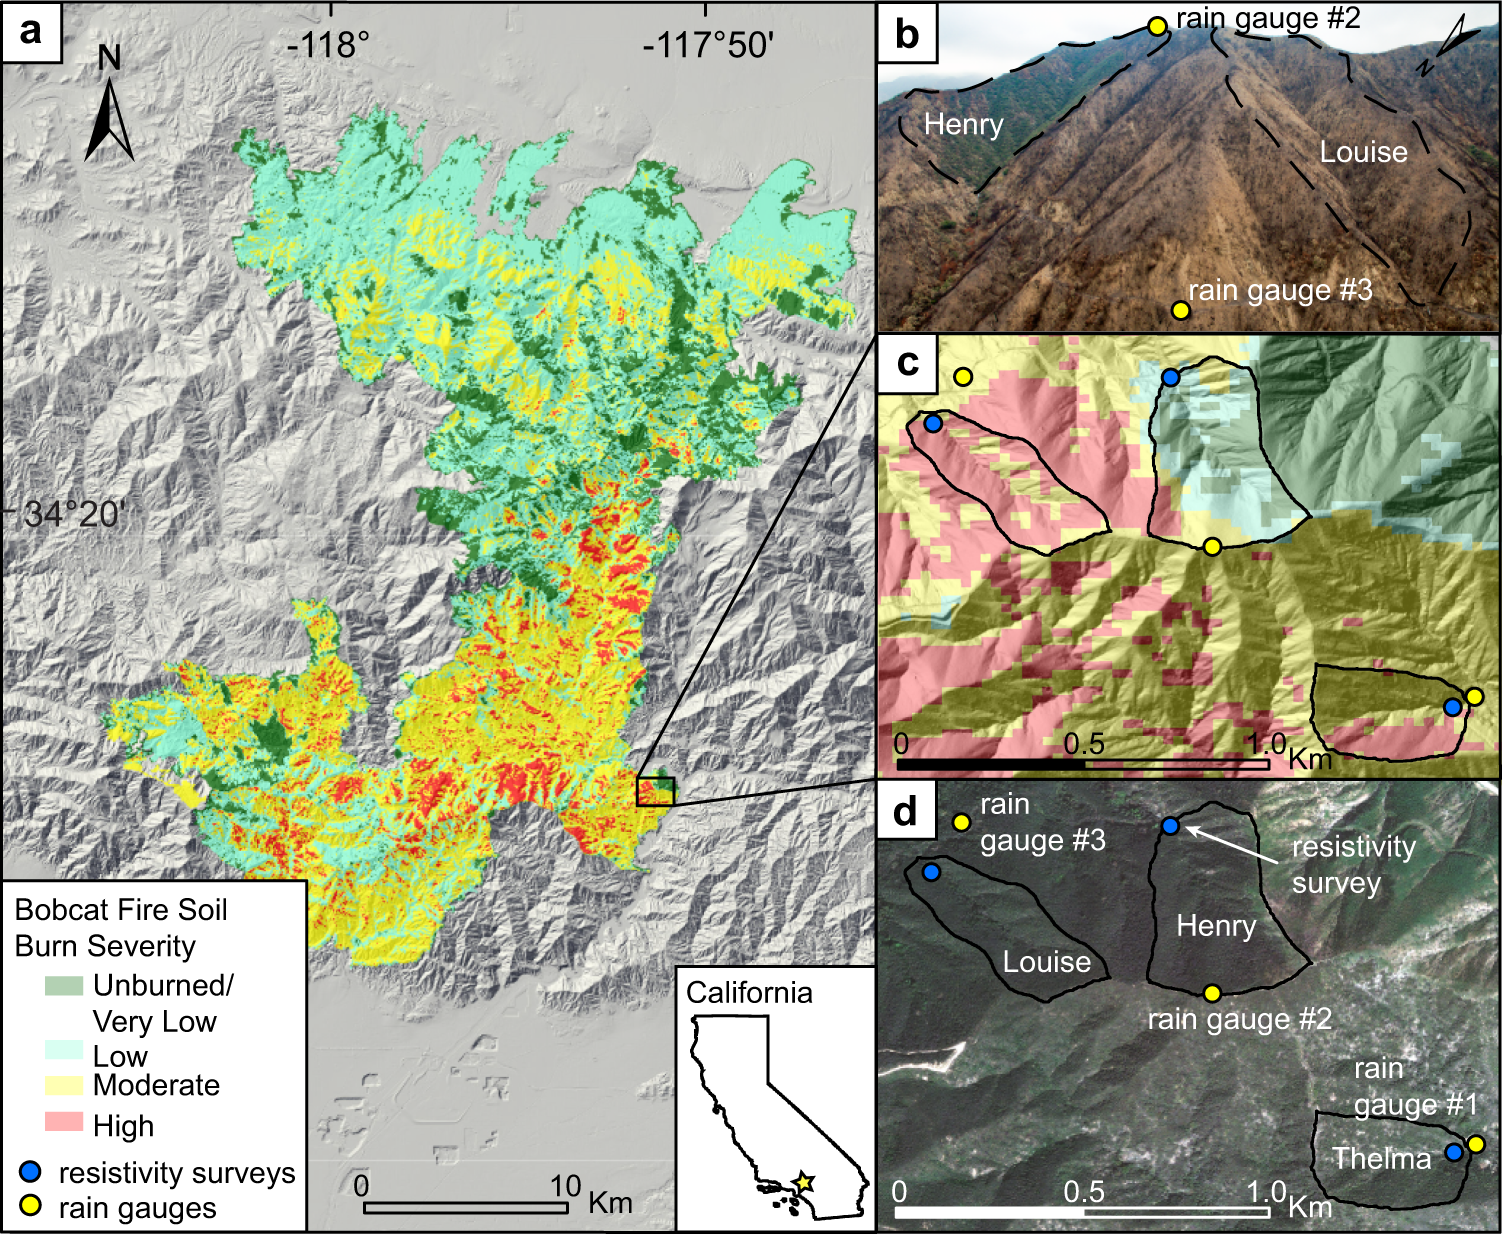 Importance of subsurface water for hydrological response during storms in a  post-wildfire bedrock landscape | Nature Communications